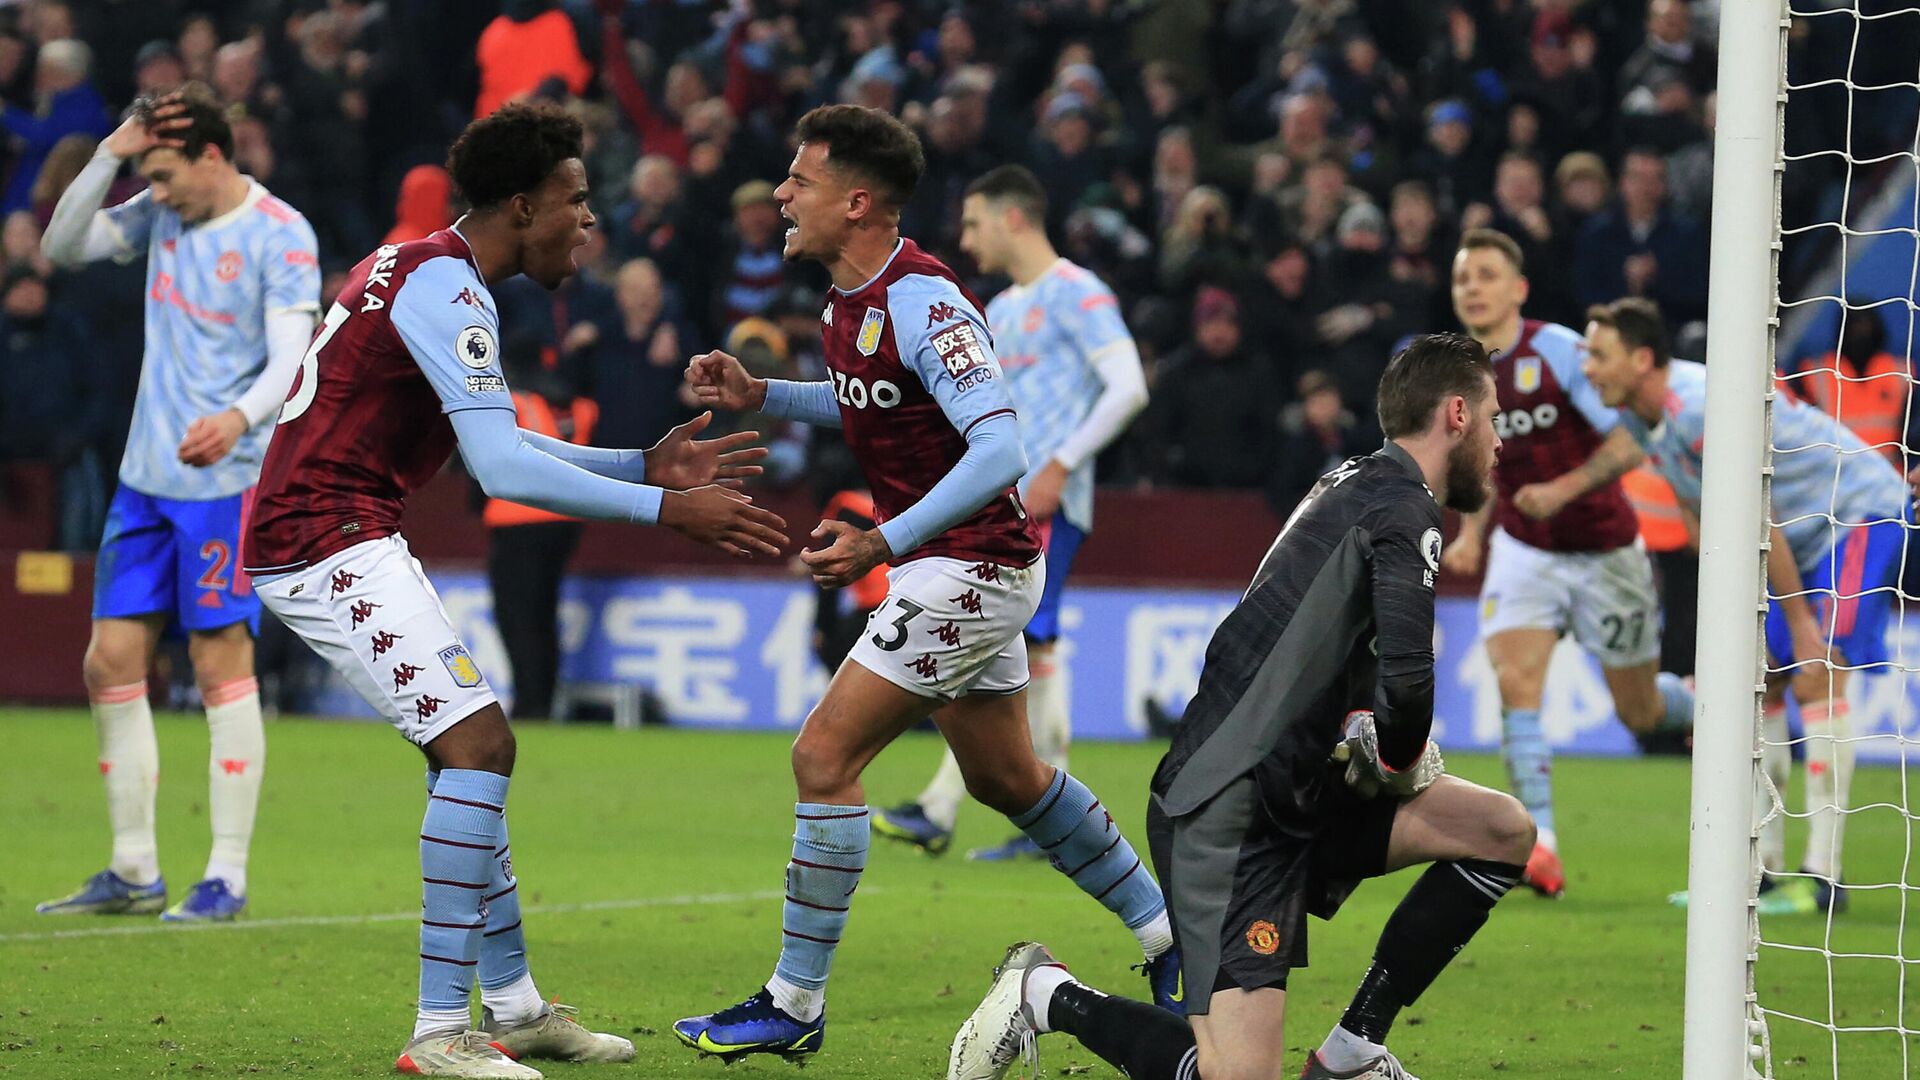 Aston Villa's Brazilian midfielder Philippe Coutinho (C) celebrates with teammates after scoring their second goal during the English Premier League football match between Aston Villa and Manchester Utd at Villa Park in Birmingham, central England on January 15, 2022. (Photo by Lindsey Parnaby / AFP) / RESTRICTED TO EDITORIAL USE. No use with unauthorized audio, video, data, fixture lists, club/league logos or 'live' services. Online in-match use limited to 120 images. An additional 40 images may be used in extra time. No video emulation. Social media in-match use limited to 120 images. An additional 40 images may be used in extra time. No use in betting publications, games or single club/league/player publications. /  - РИА Новости, 1920, 15.01.2022